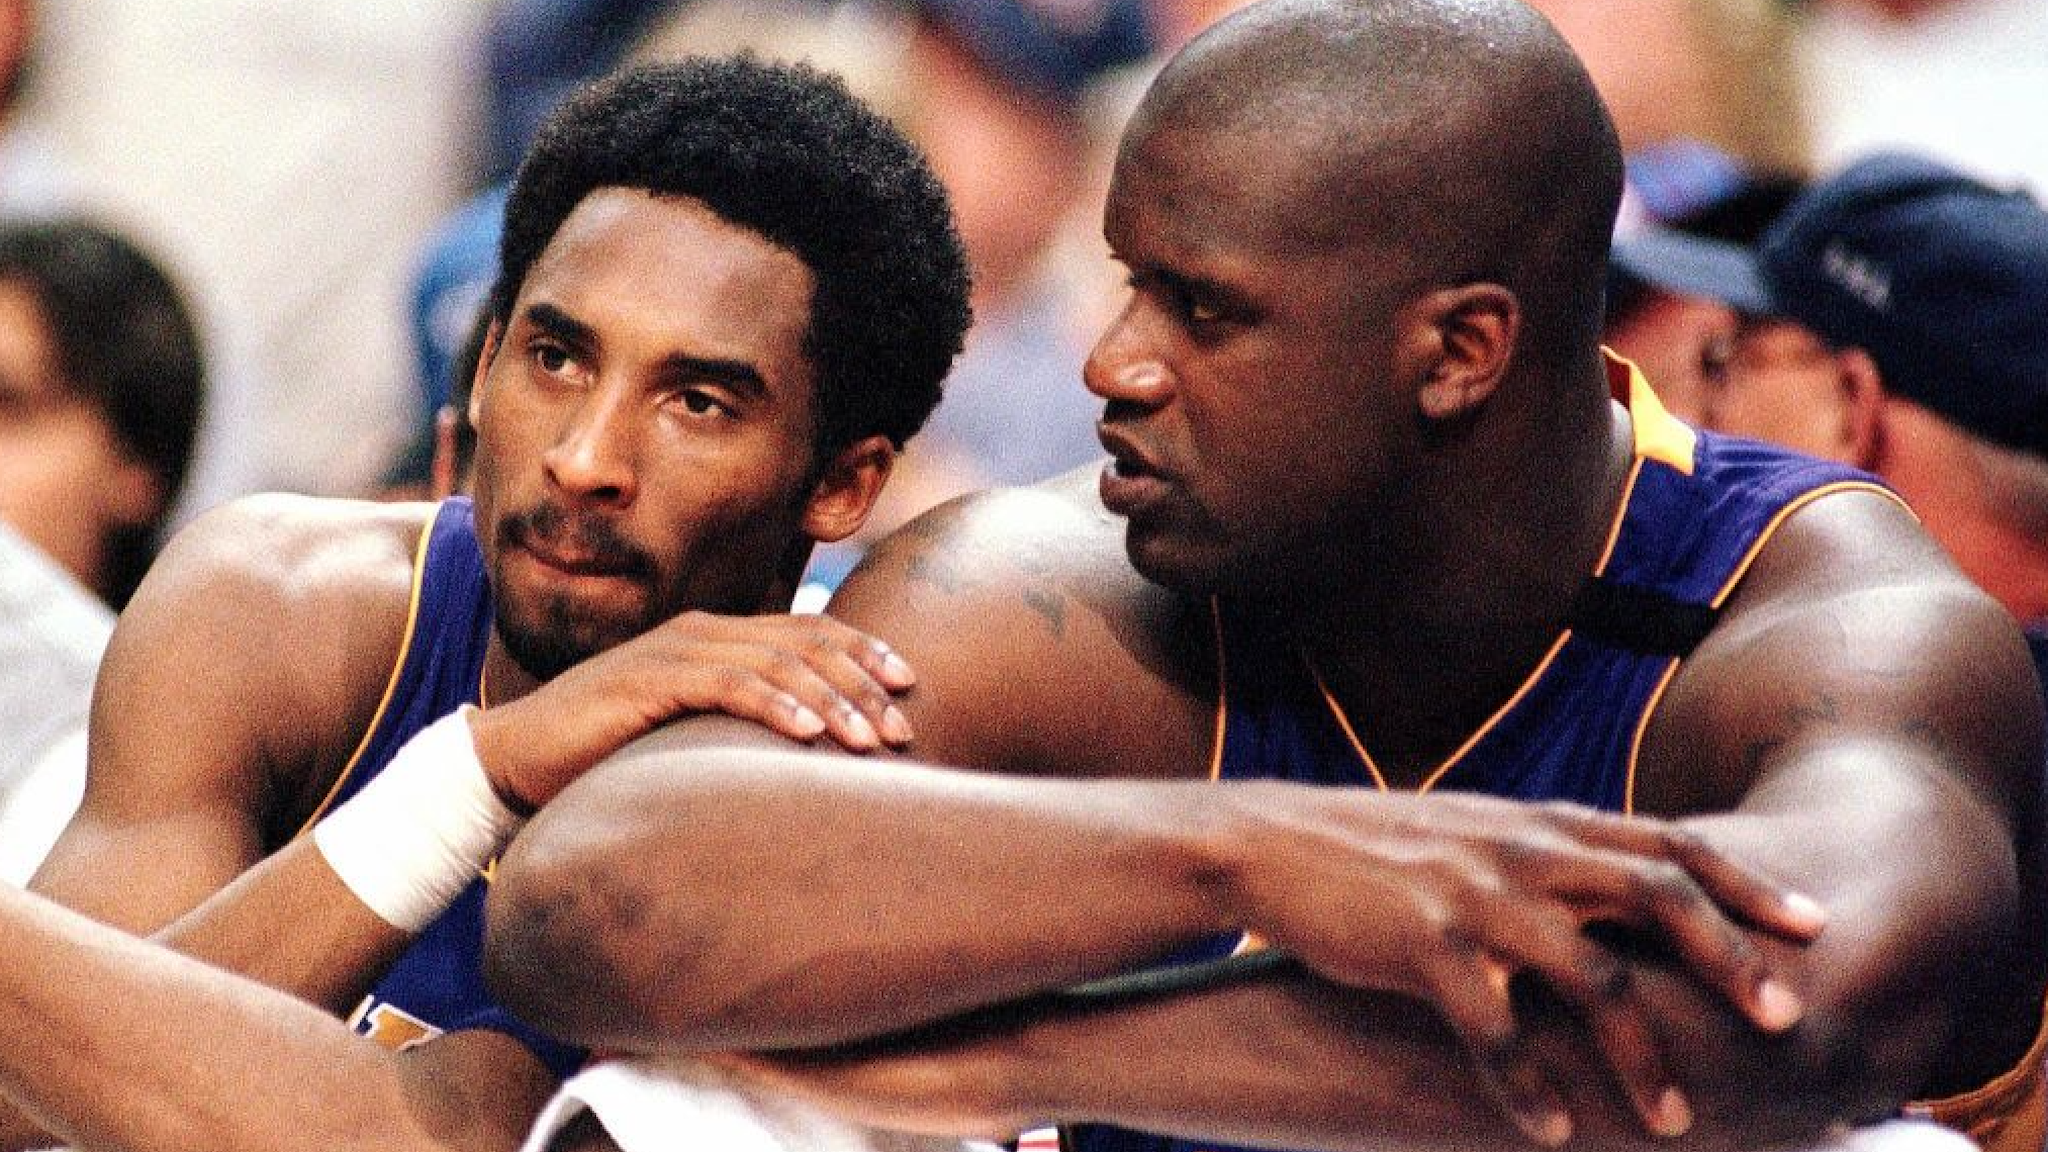 Los Angeles Lakers forward Kobe Bryant (L) speaks with teammate Shaquille O'Neal as they sit out the end of the fourth quarter against the Phoenix Suns in game four of the Western Conference semi-finals 14 May 2000 at America West Arena in Phoenix.